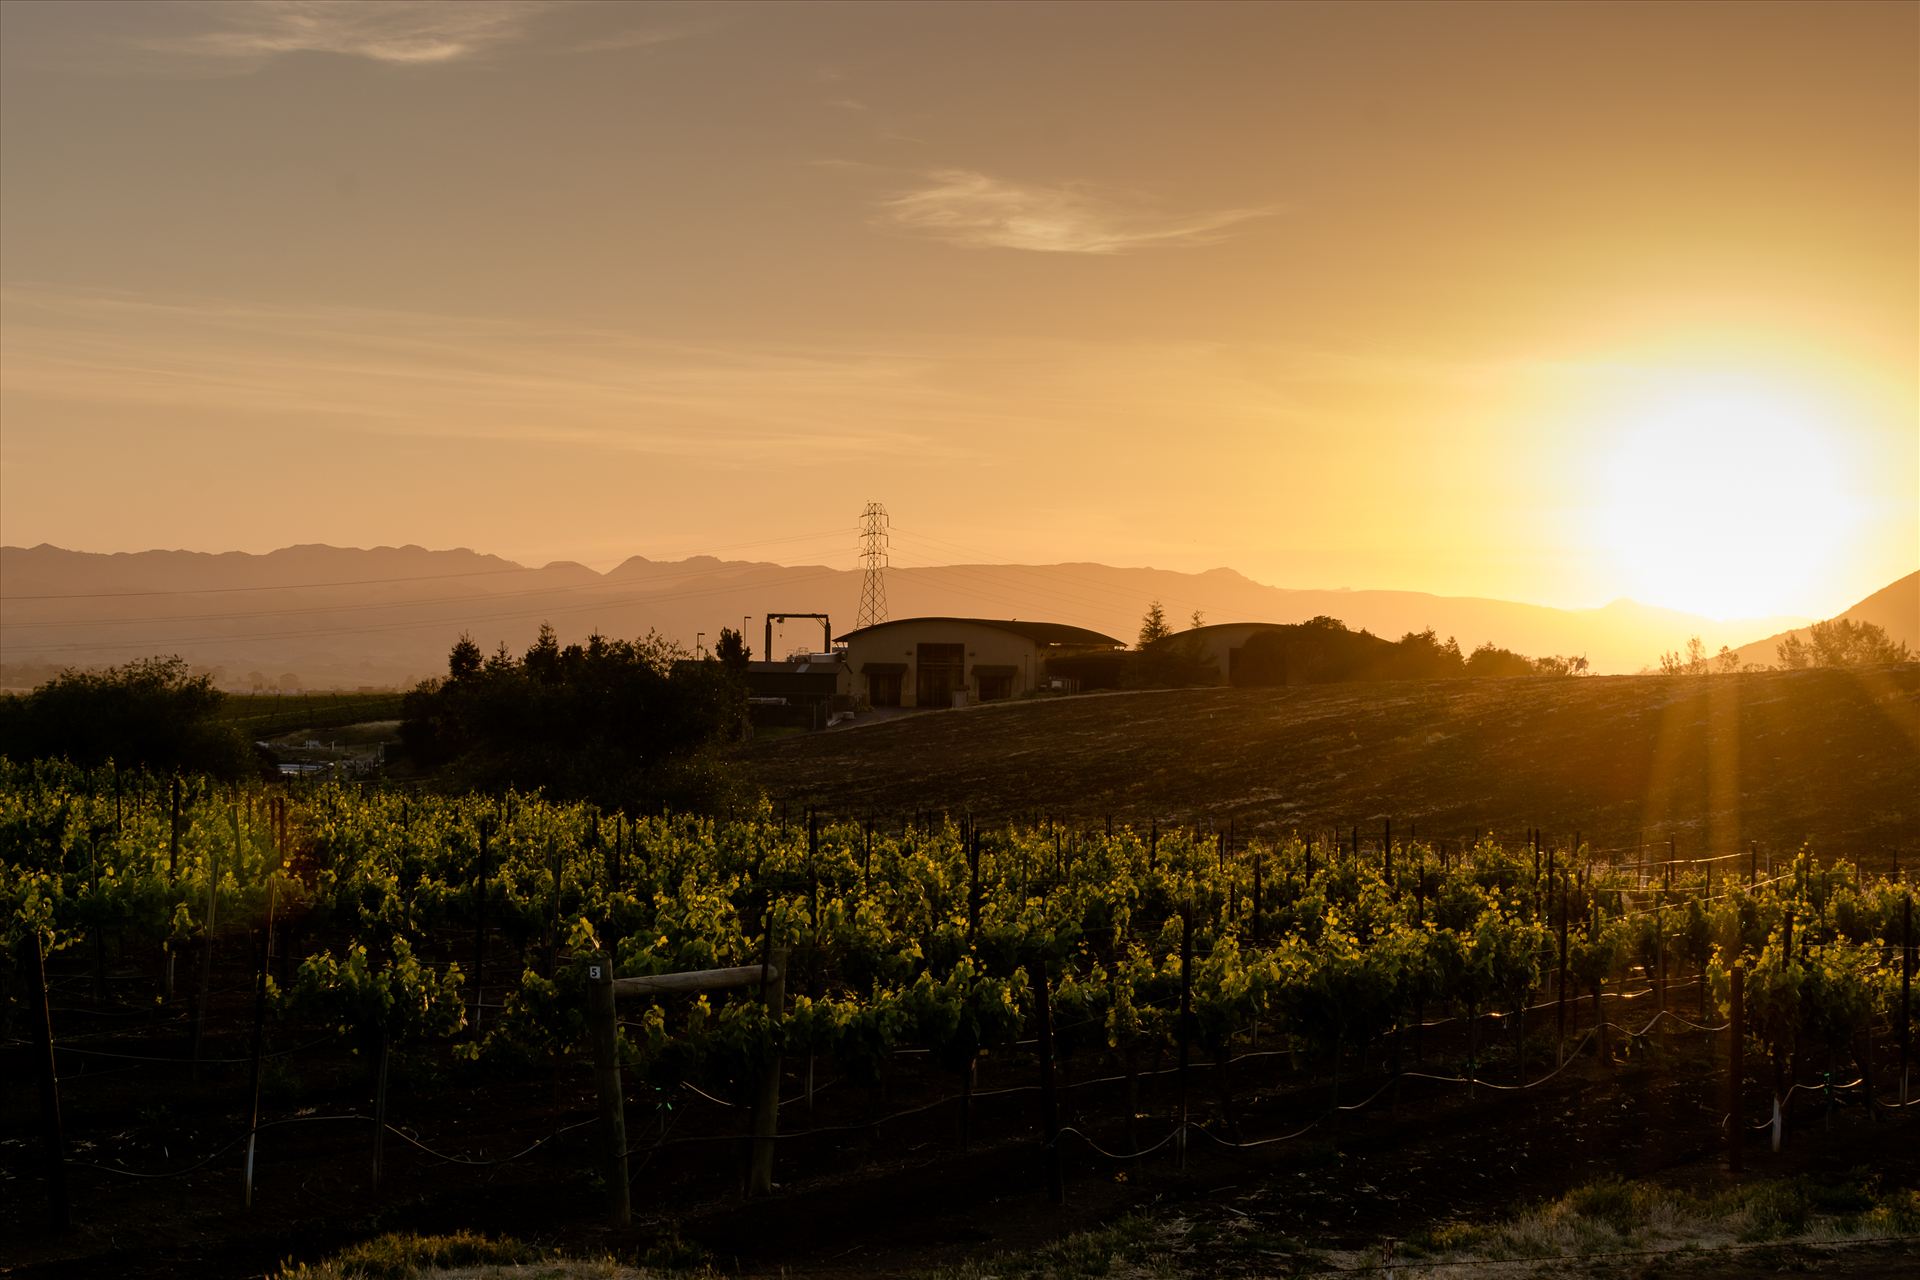 Vineyard Sunset.jpg Central Coast Vineyard Sunset and Wine Makers Home by Sarah Williams